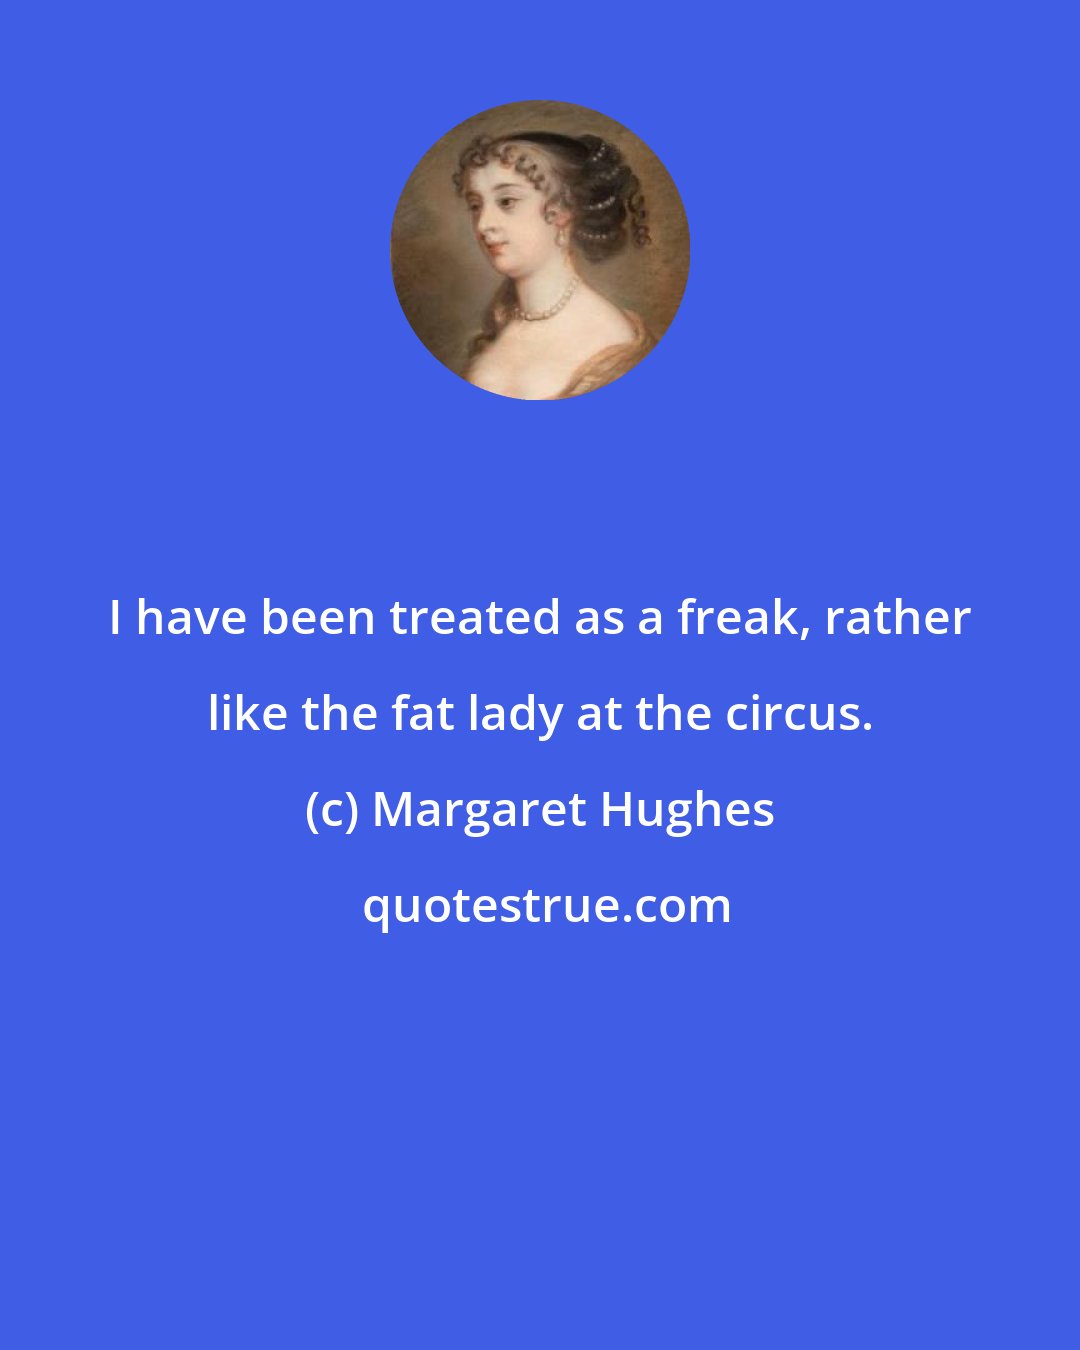 Margaret Hughes: I have been treated as a freak, rather like the fat lady at the circus.